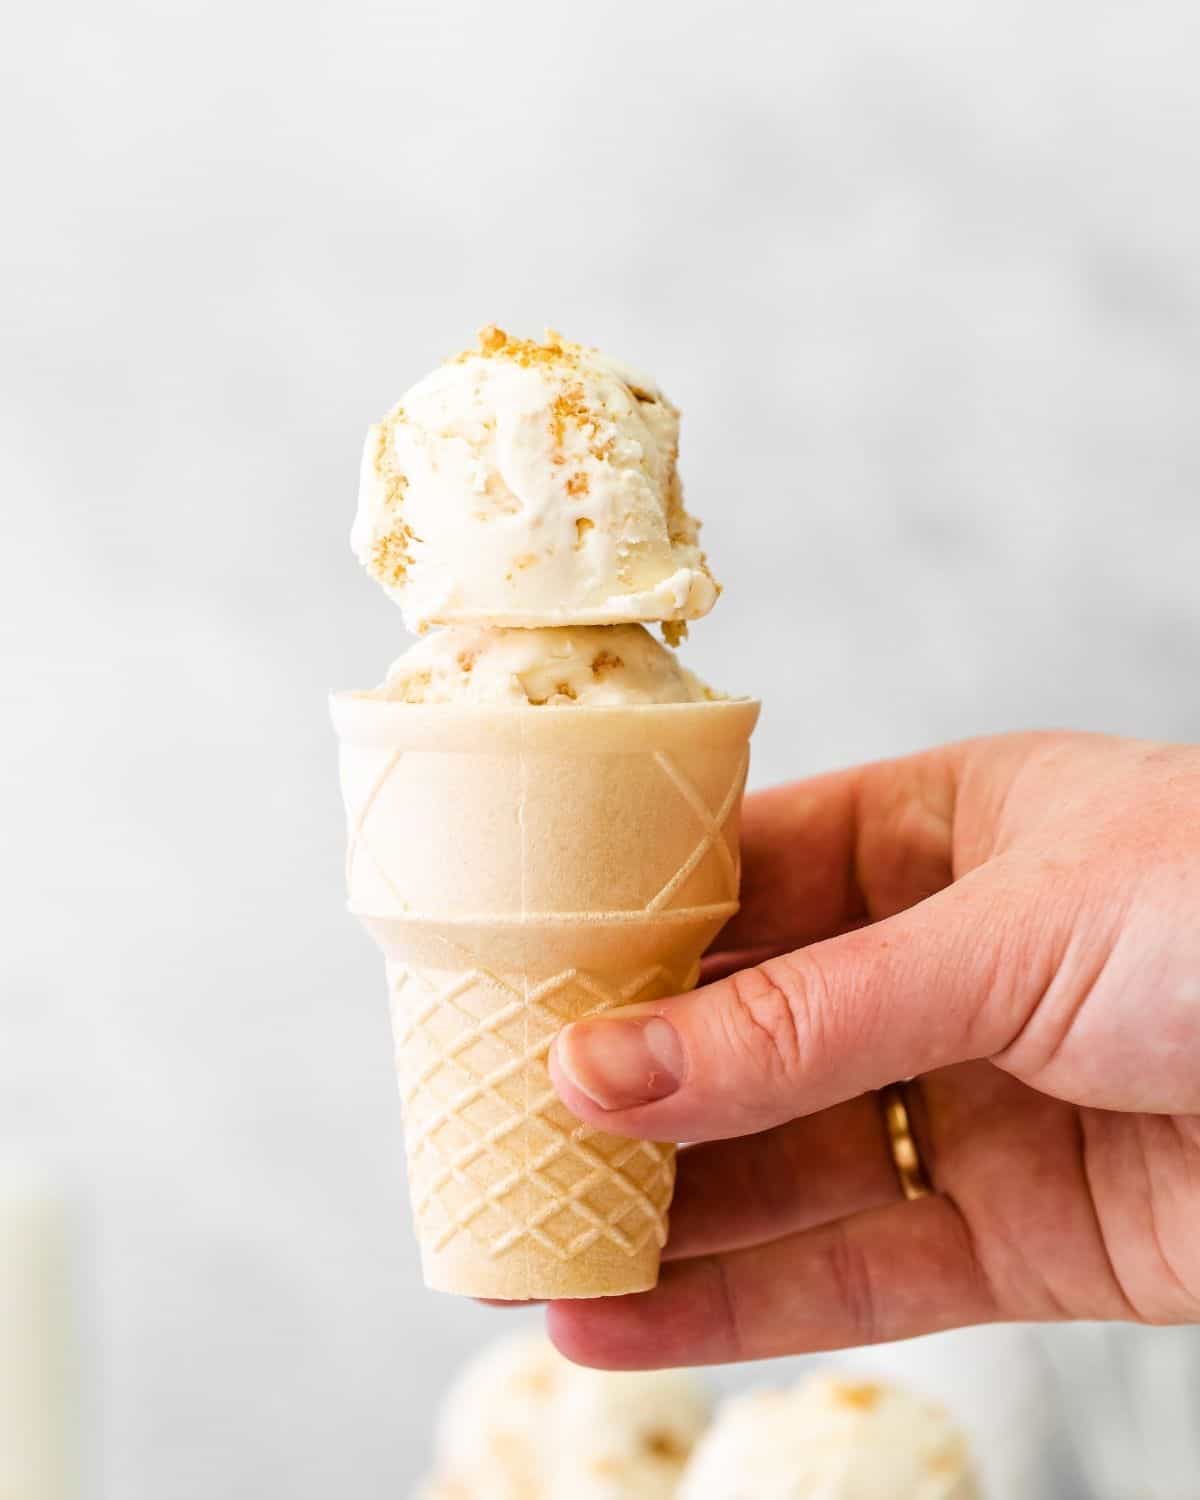 A wafer ice cream cone with cheesecake ice cream in it.